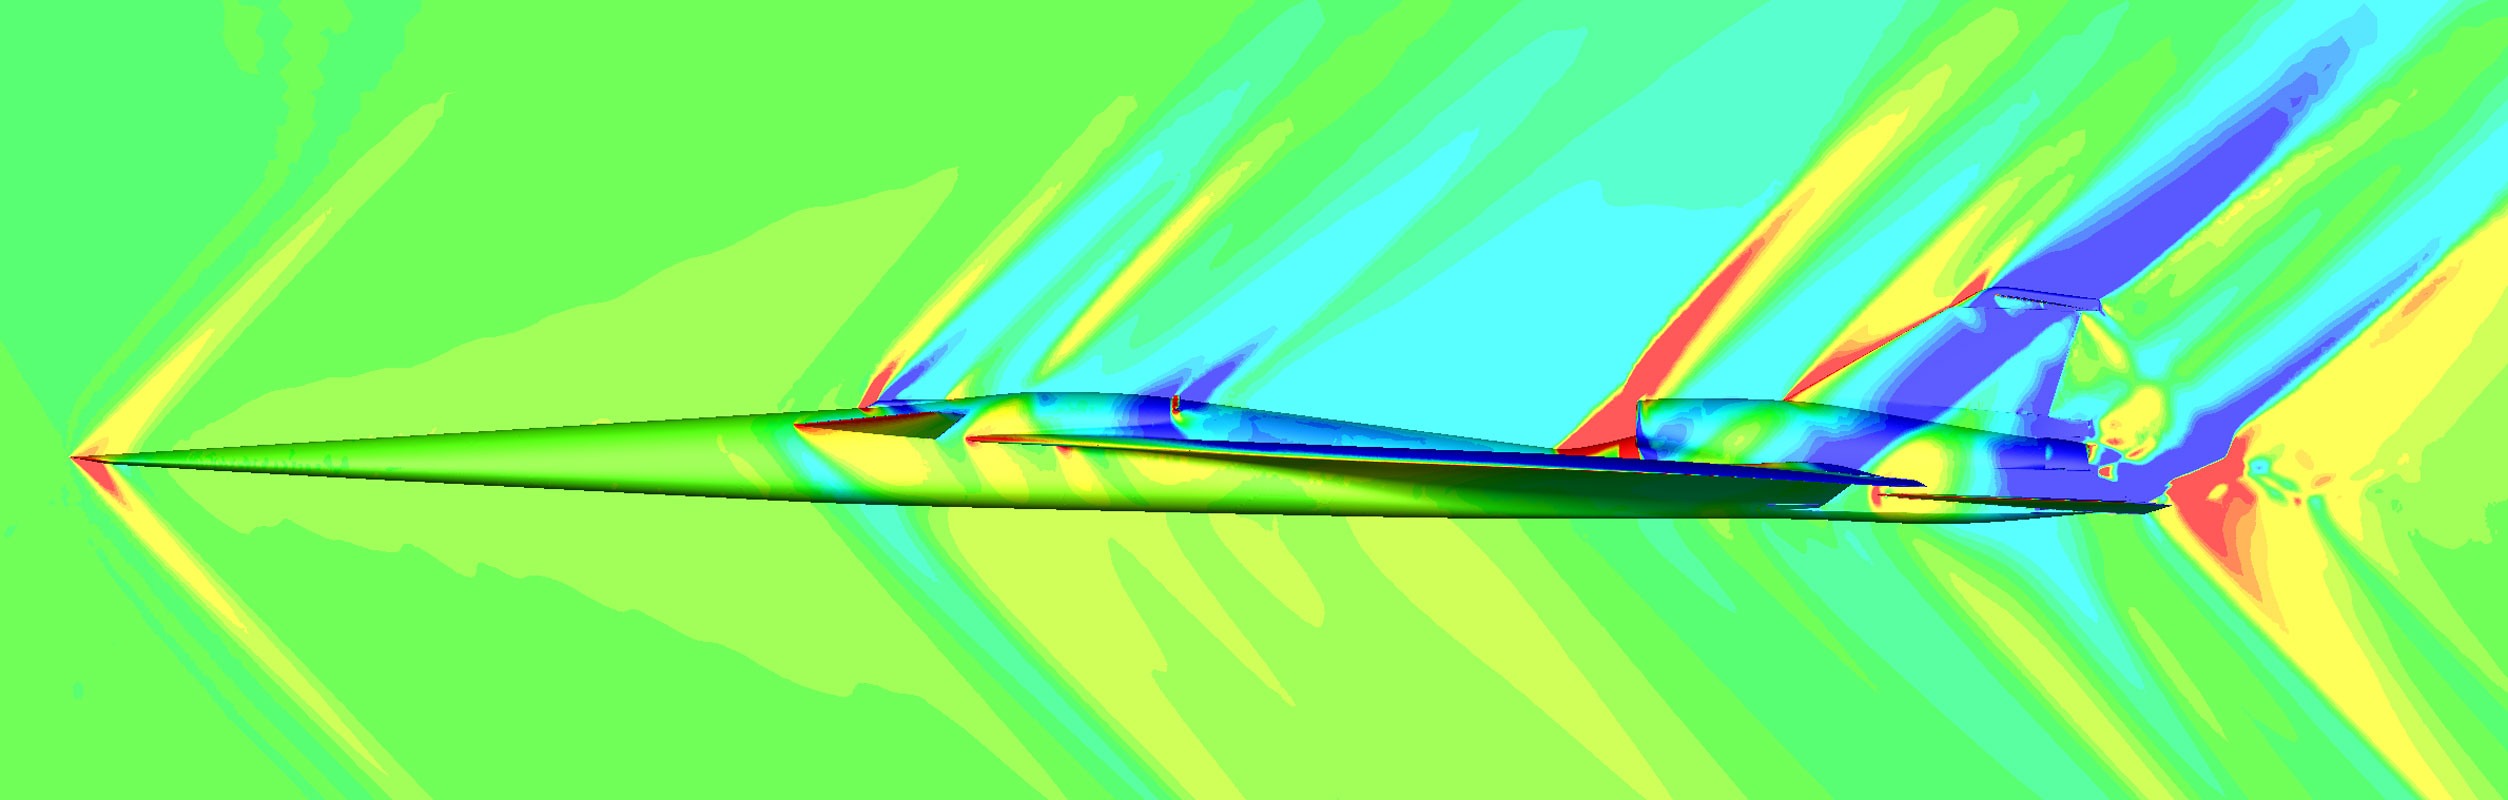 CFD simulations of the X-plane in flight require accurate modeling of both the aircraft and the flow field that occurs in its vicinity.